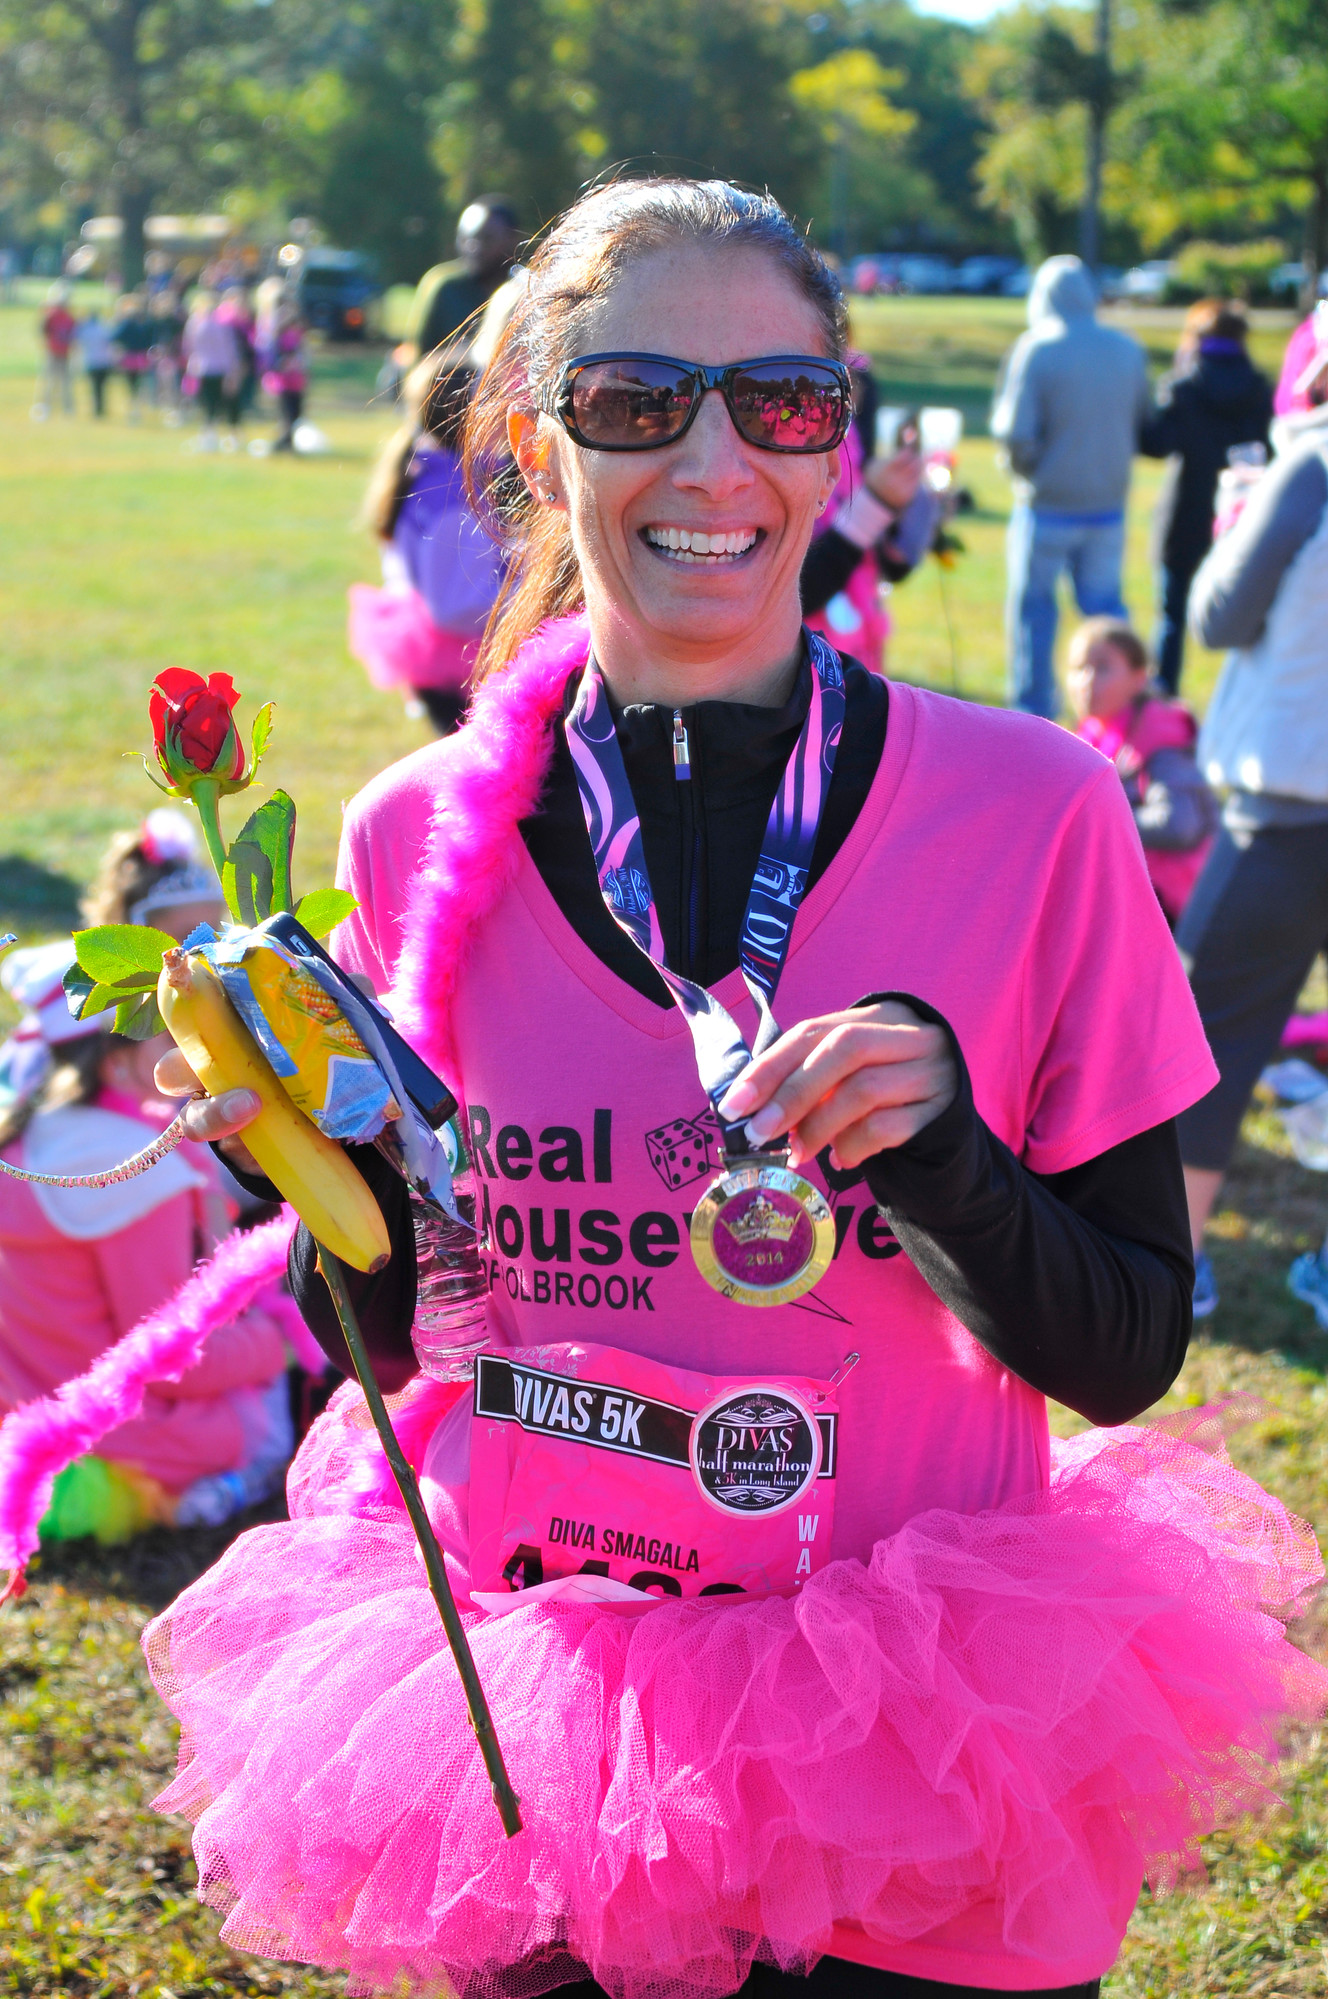 Dena Smagala of Holtsville proudly shows off her medal at the end of the race, which was awarded to each race finisher.